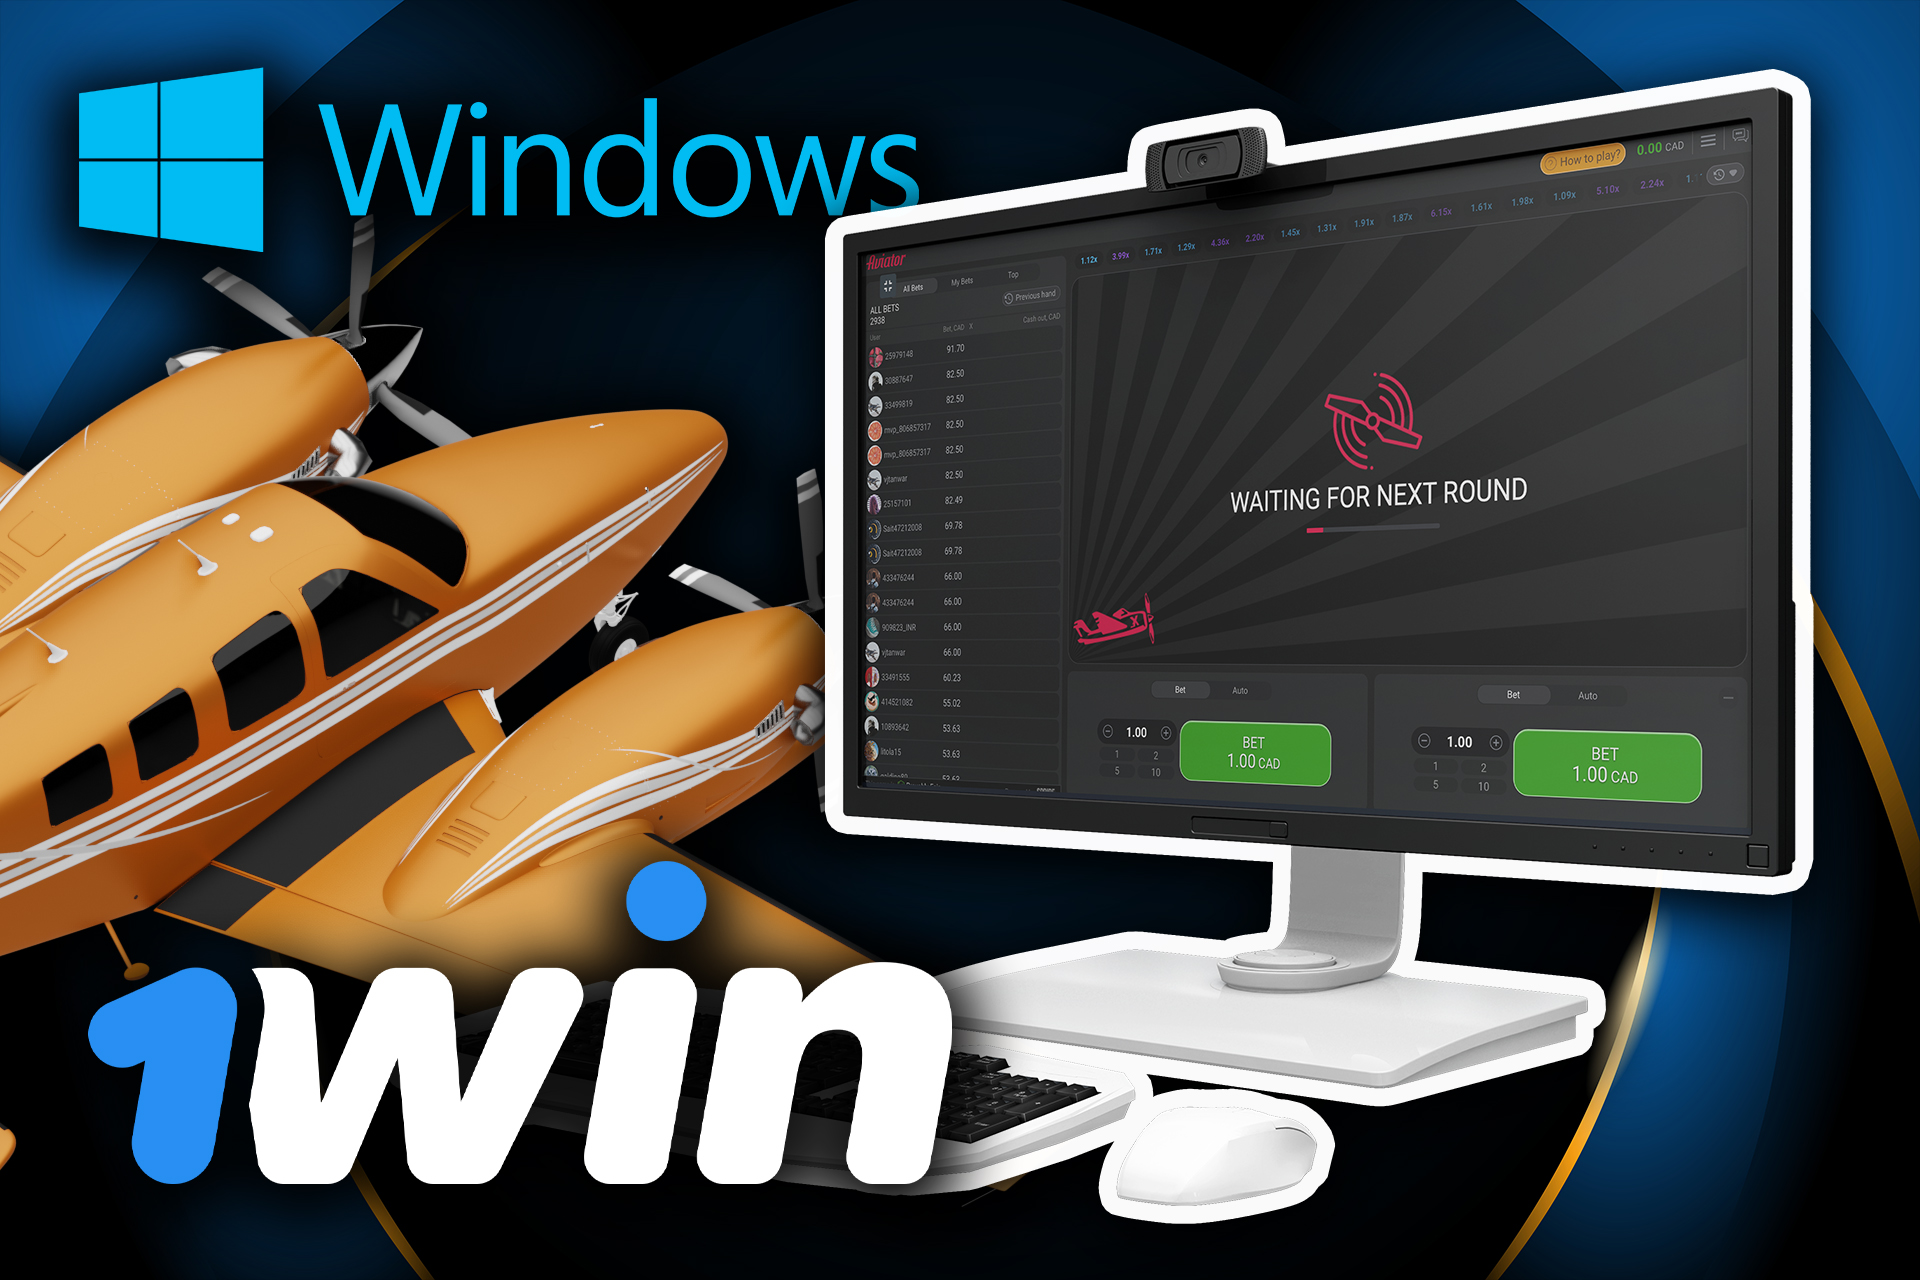 There is also a desktop version of 1win to play via laptop.